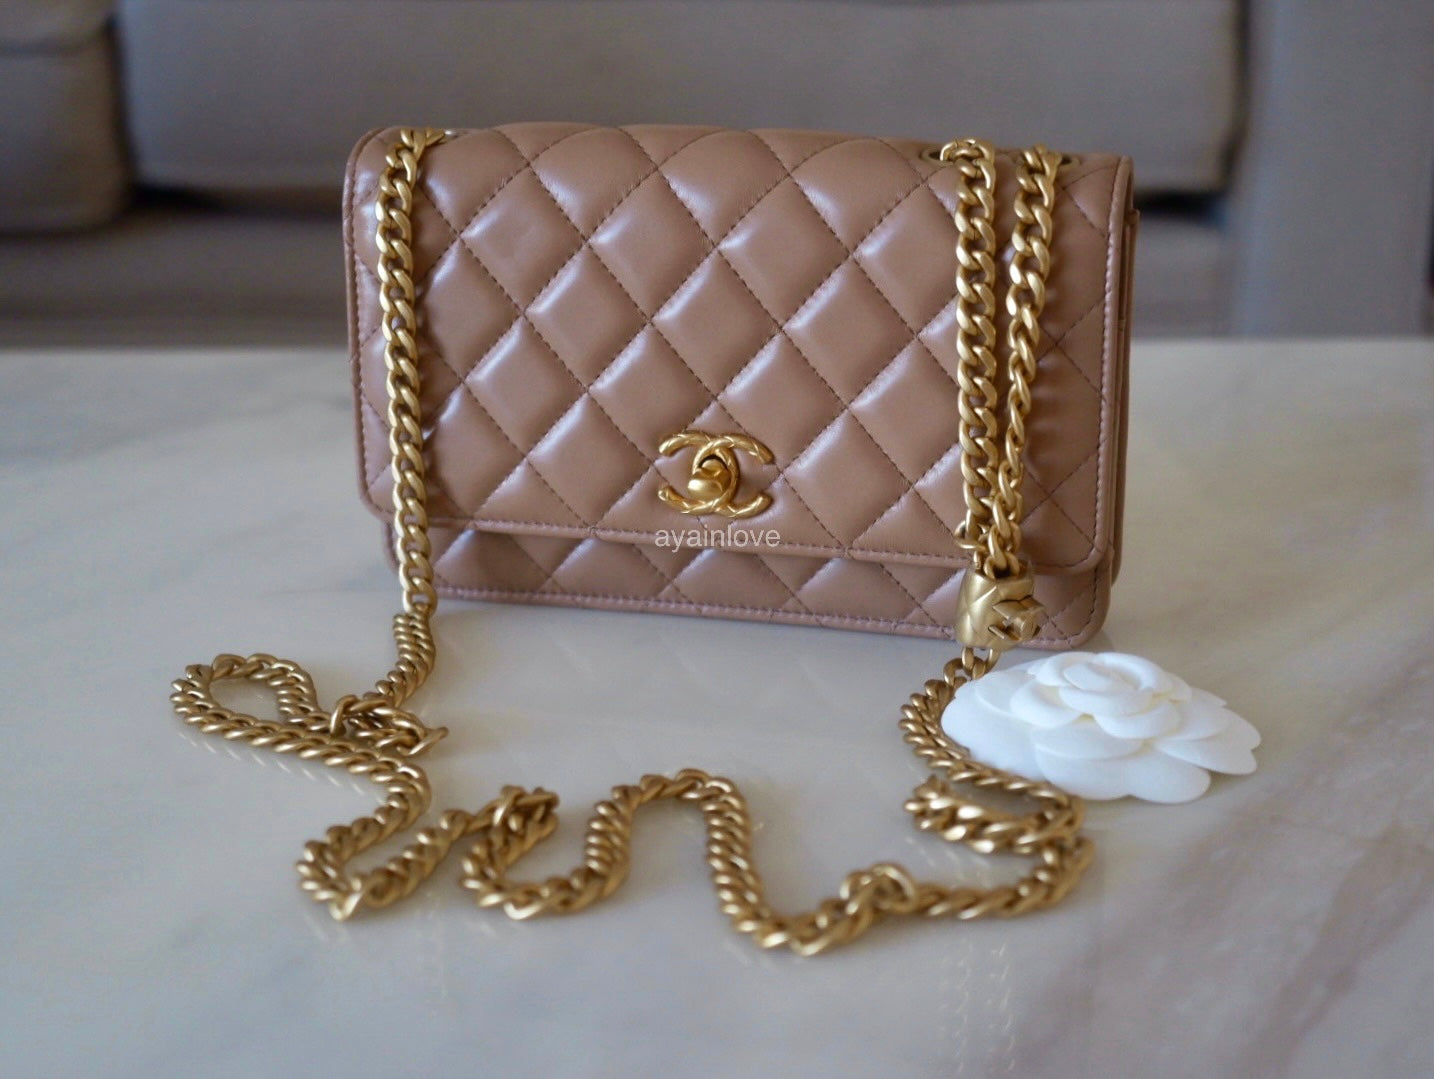 Chanel Wallet on Chain, 22A Dark Beige Caviar Leather, Gold Hardware, New  in Box GA002